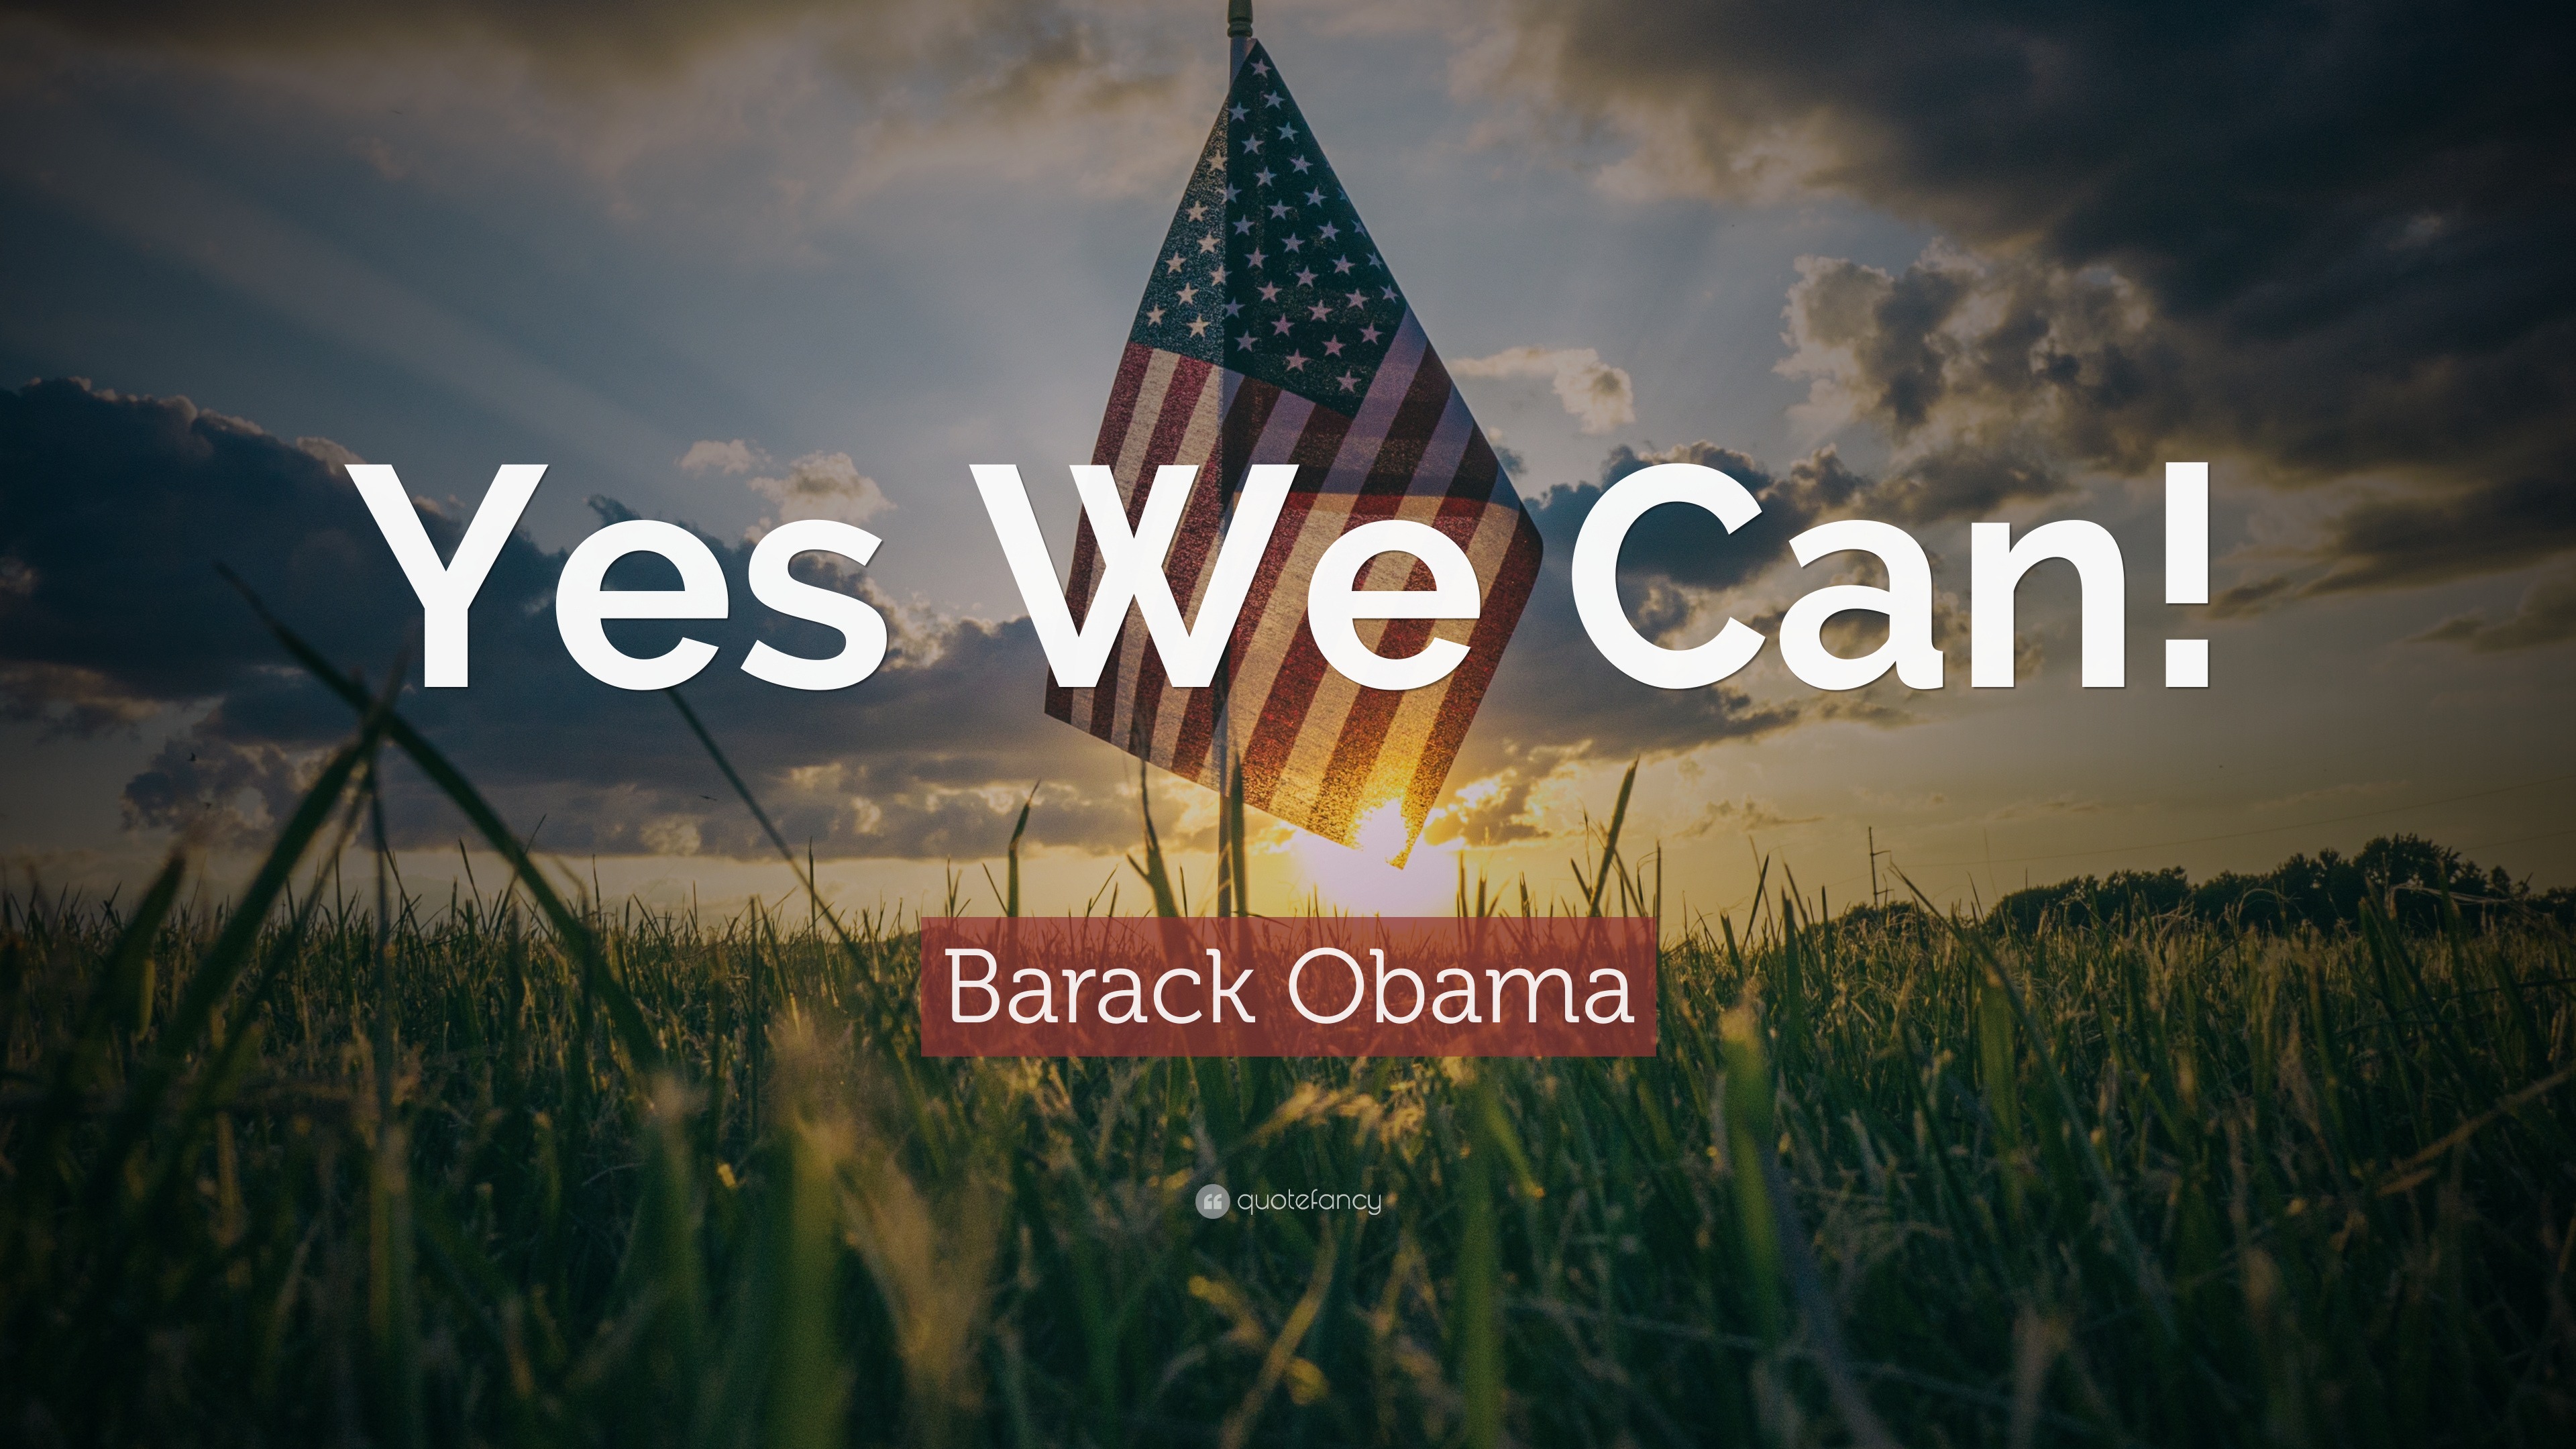 Yes we can t. Yes we can Obama. Yes we can. Yes you can.